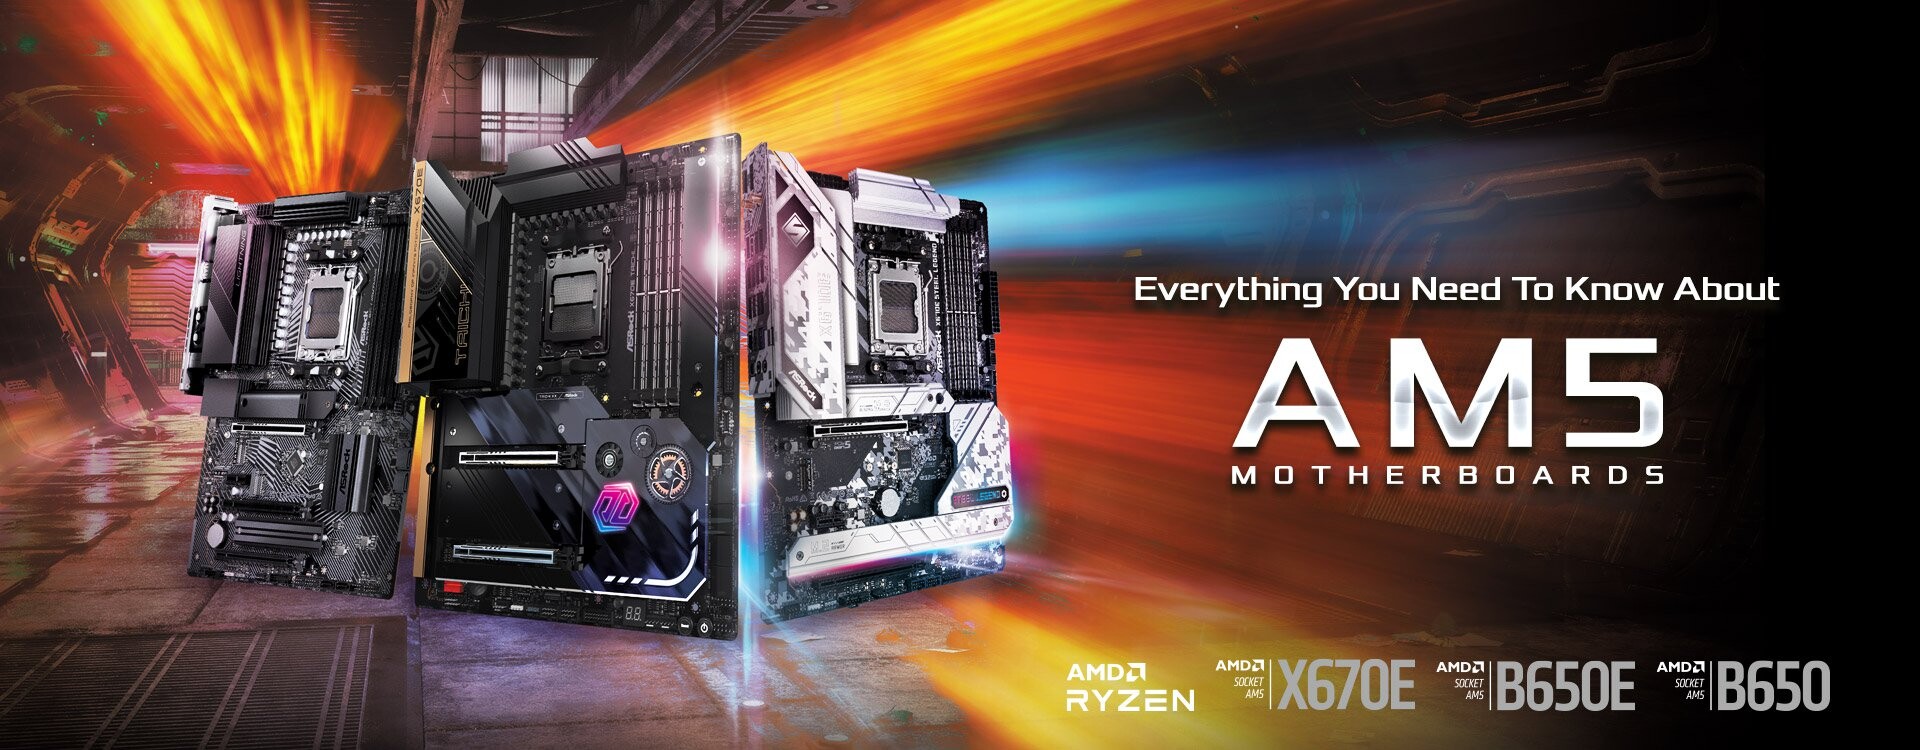 ASRock AM5 Motherboards are prepared to support the upcoming AMD Ryzen Series processors.